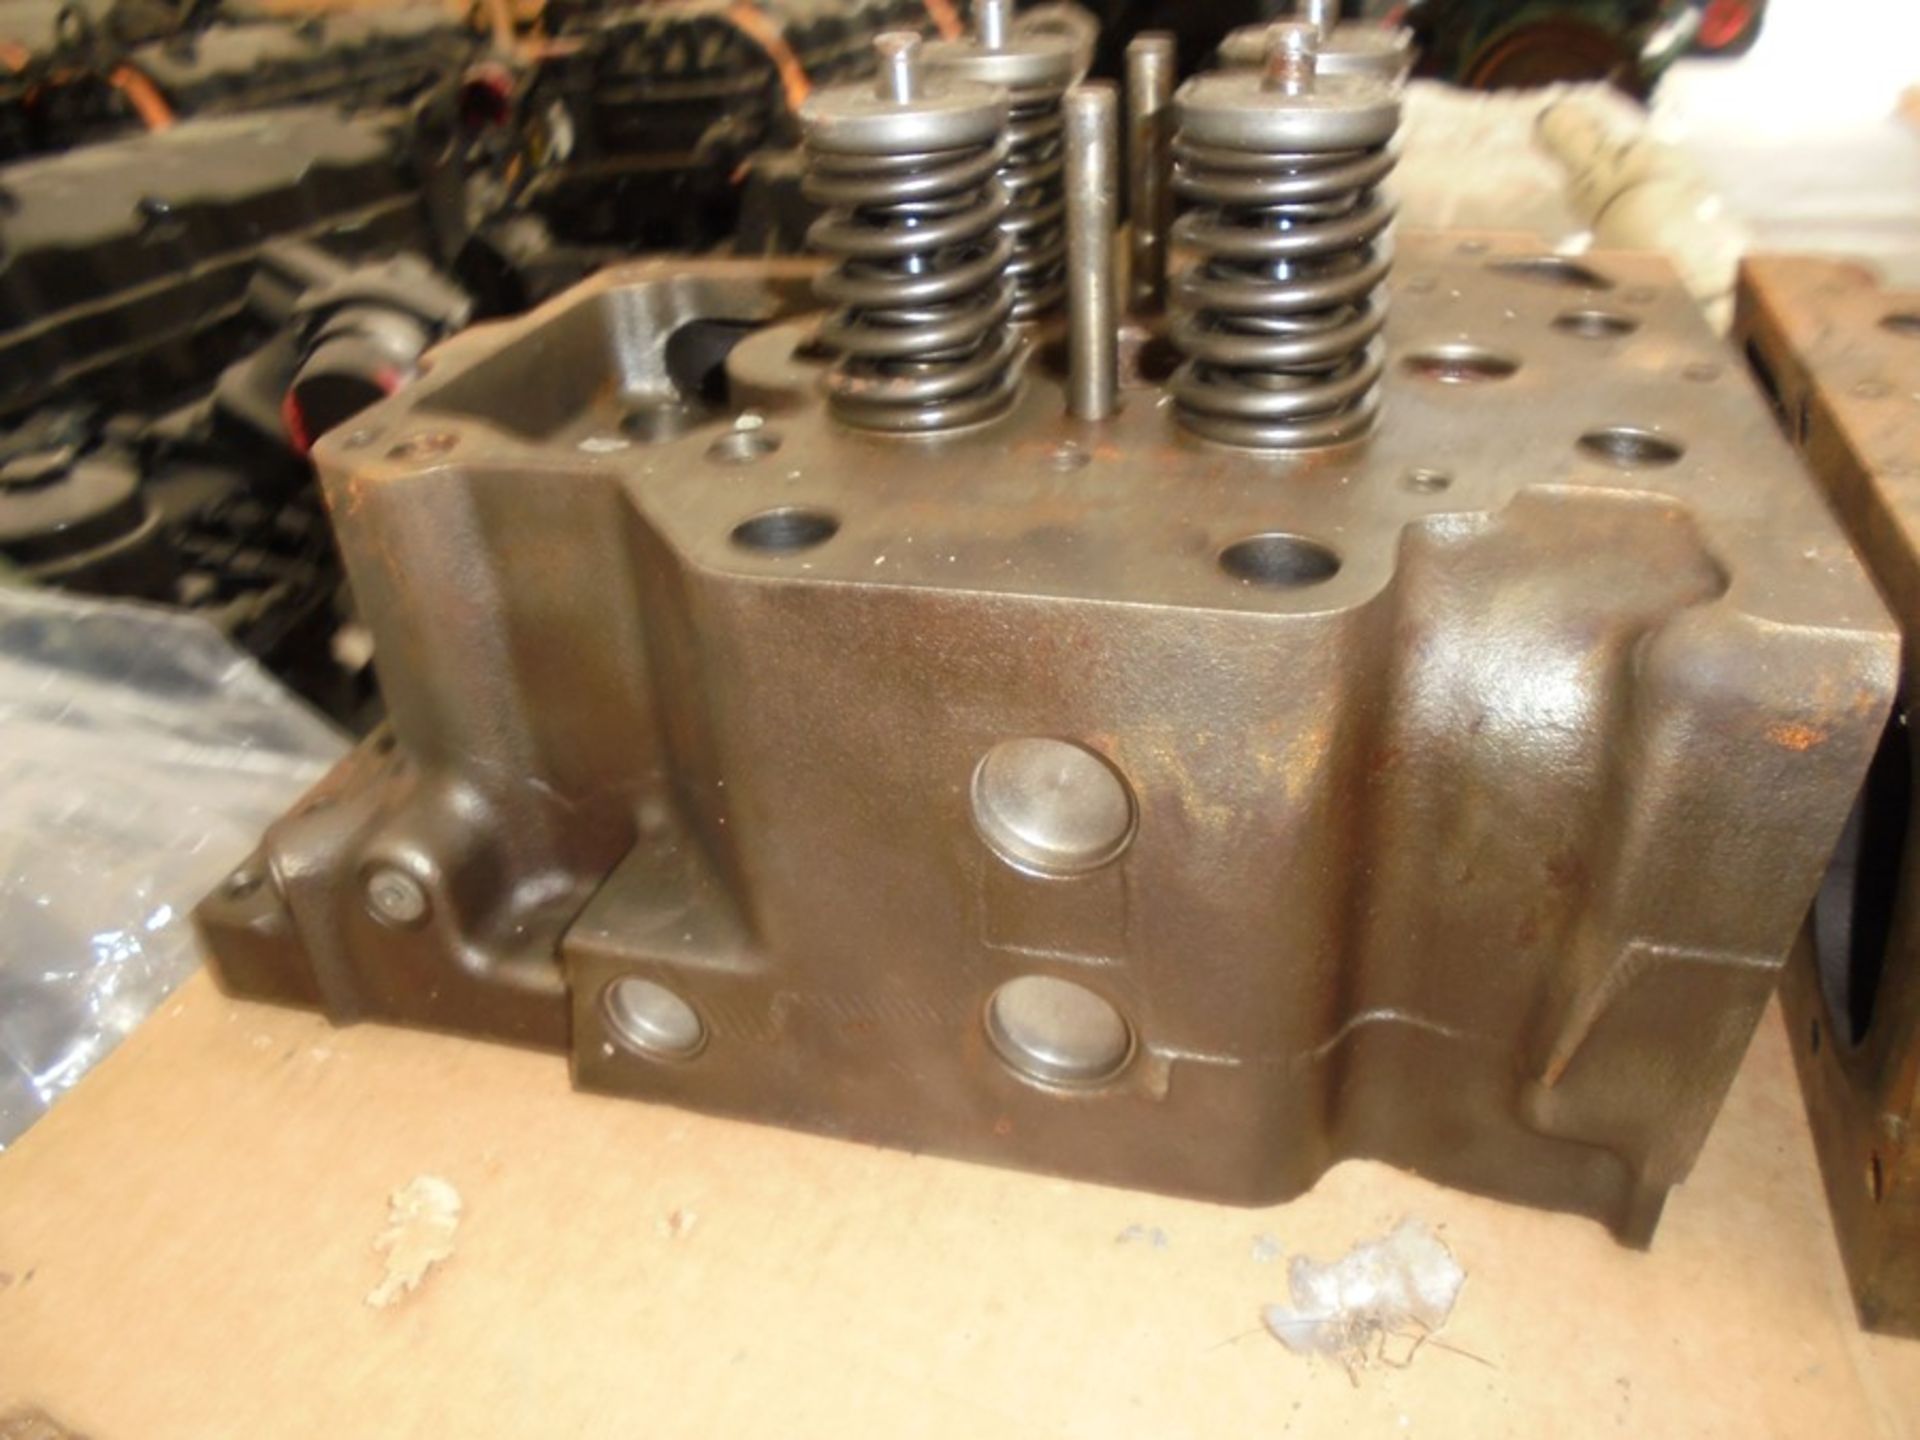 5 x used Caterpillar 3516 cylinder heads, part numbers 205-1560 and 20R3547 (mostly without valves). - Image 2 of 6